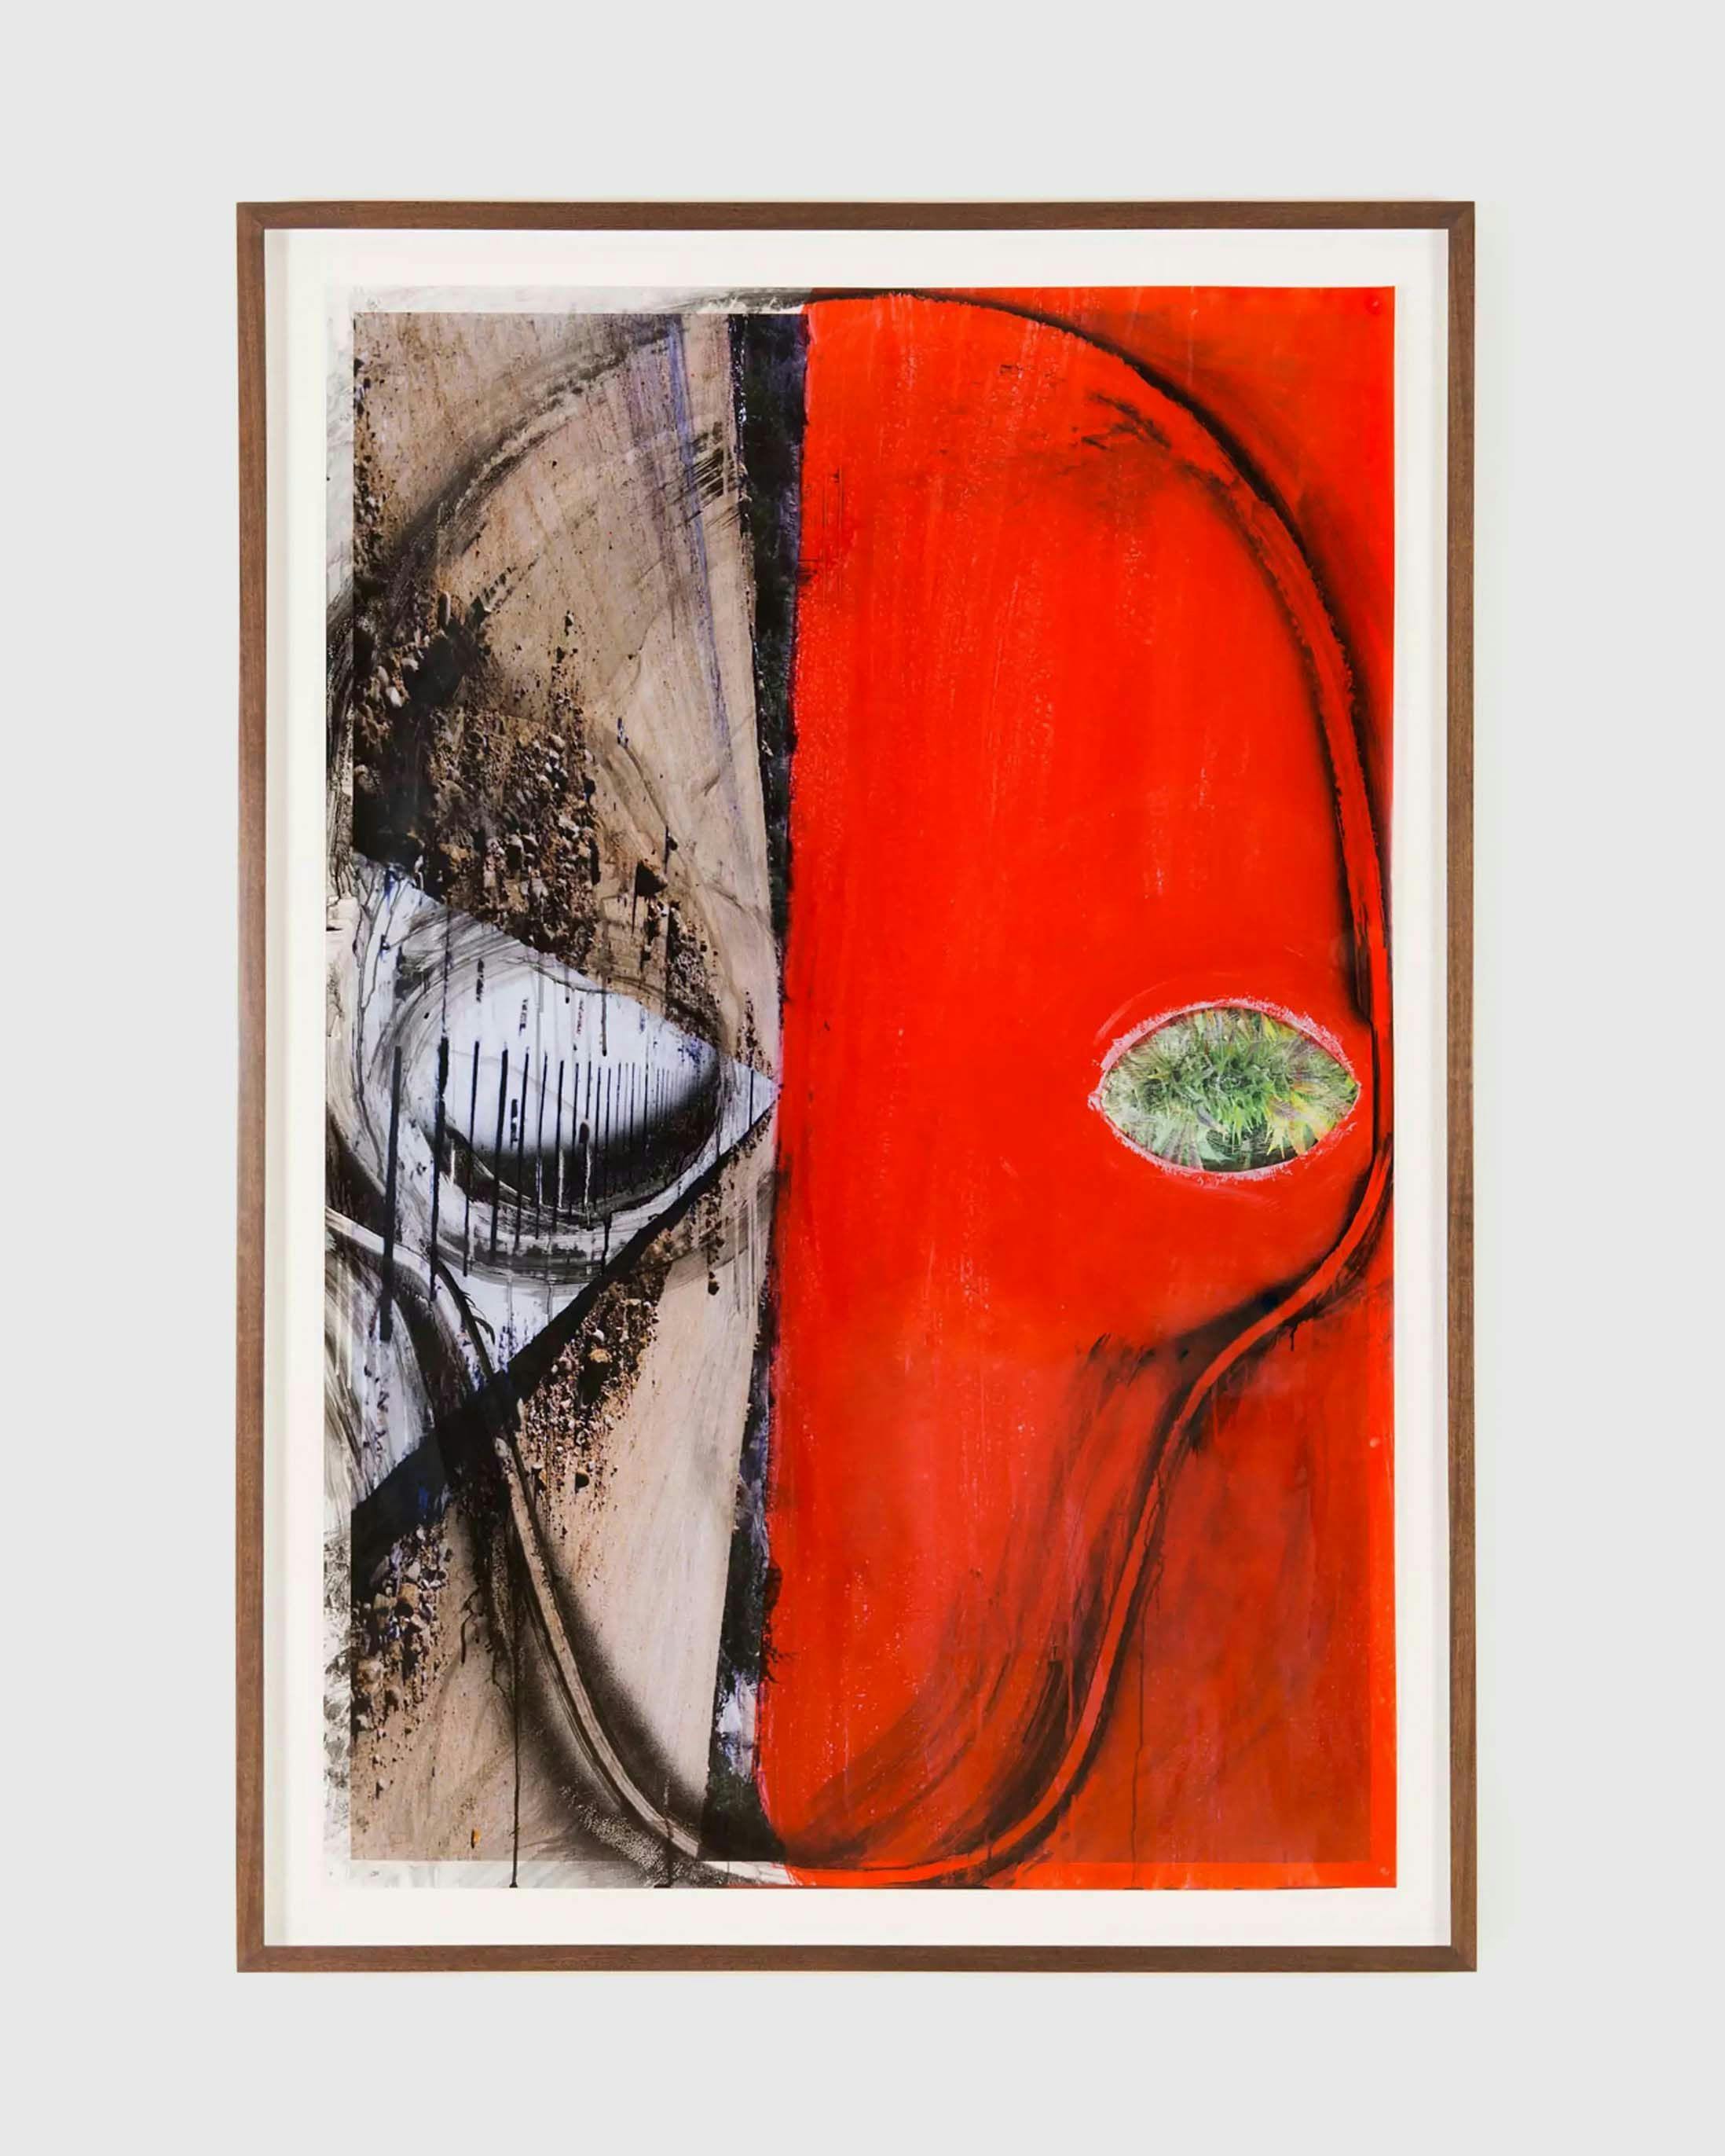 An ink, collage, and acrylic paint on color photograph artwork by Huma Bhabha, titled Untitled, dated 2017.